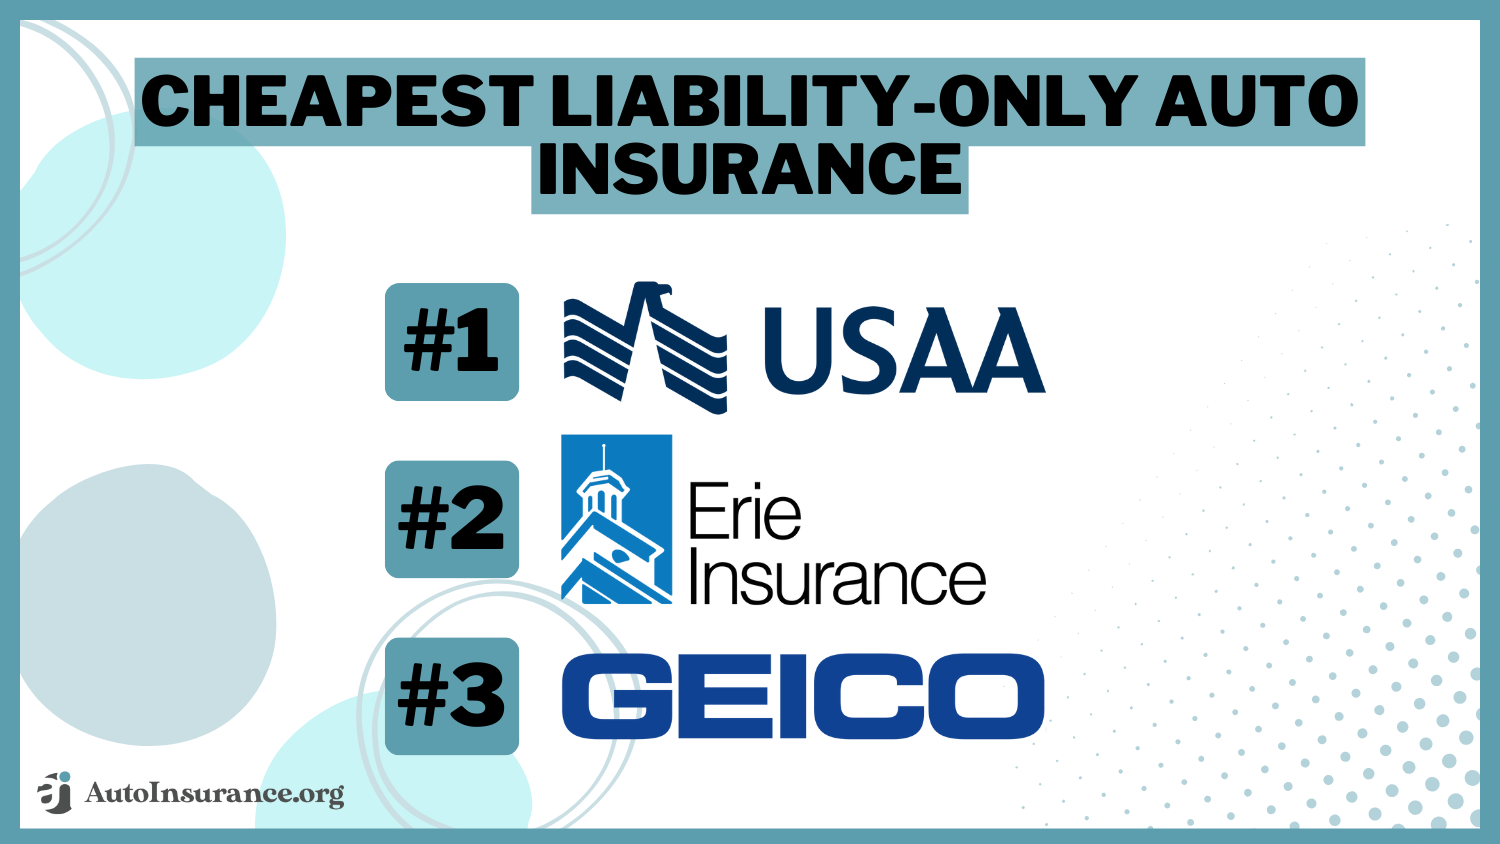 Cheapest Liability-Only Auto Insurance: USAA, Erie, Geico